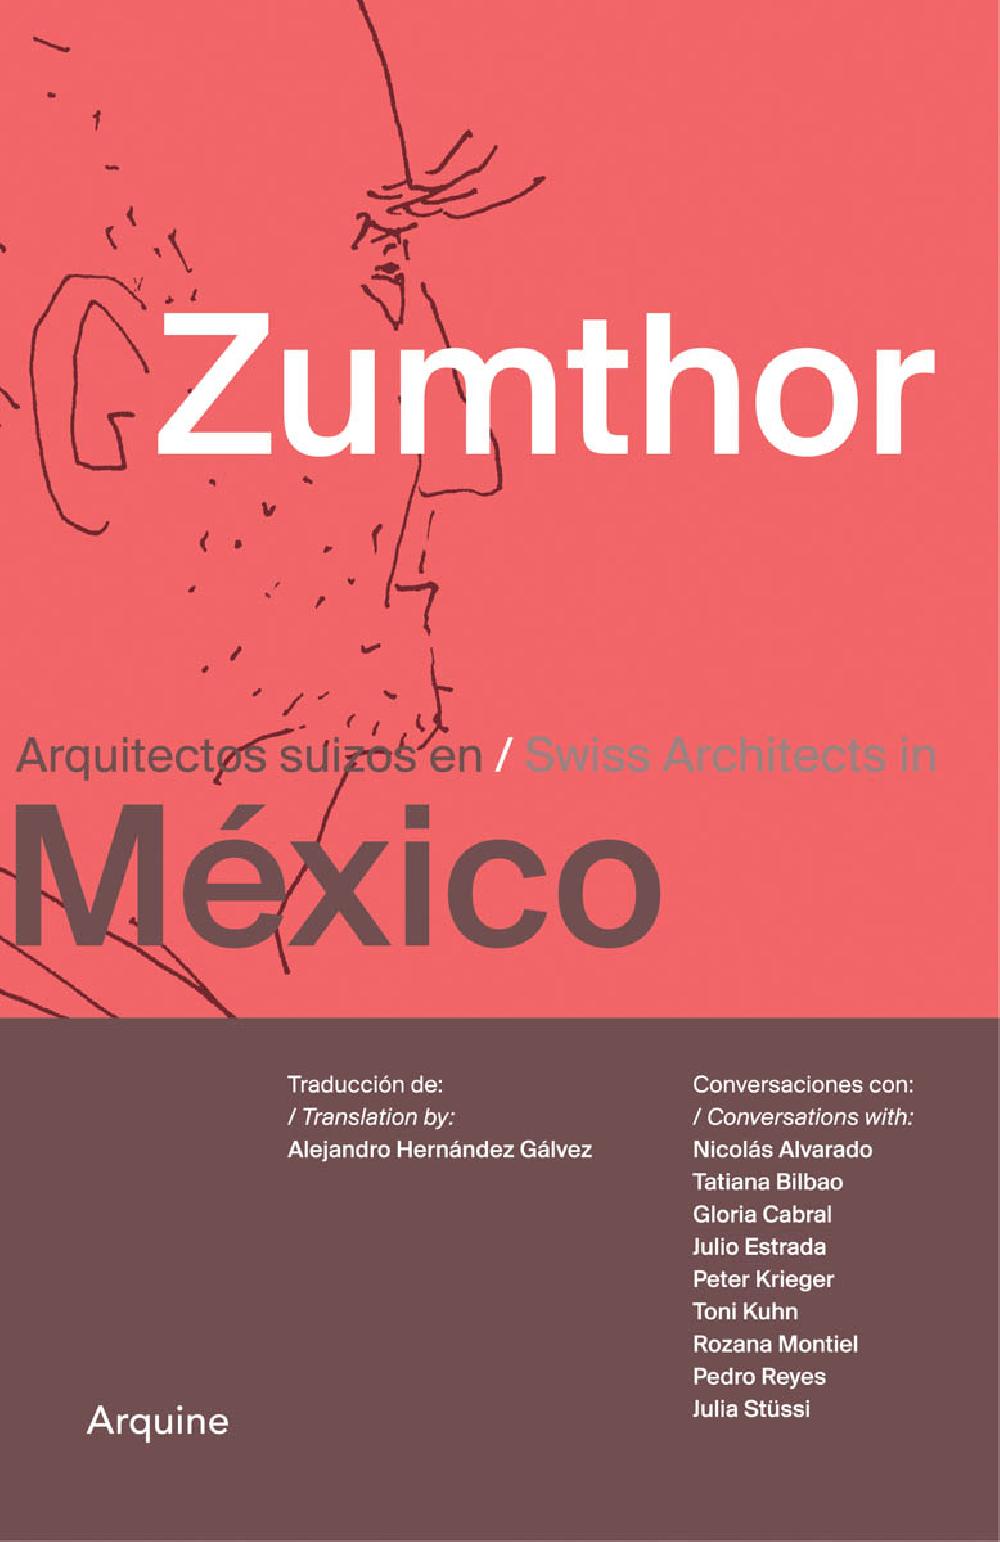 Zumthor: Swiss Architects in / Arquitectos suizos en Mexico